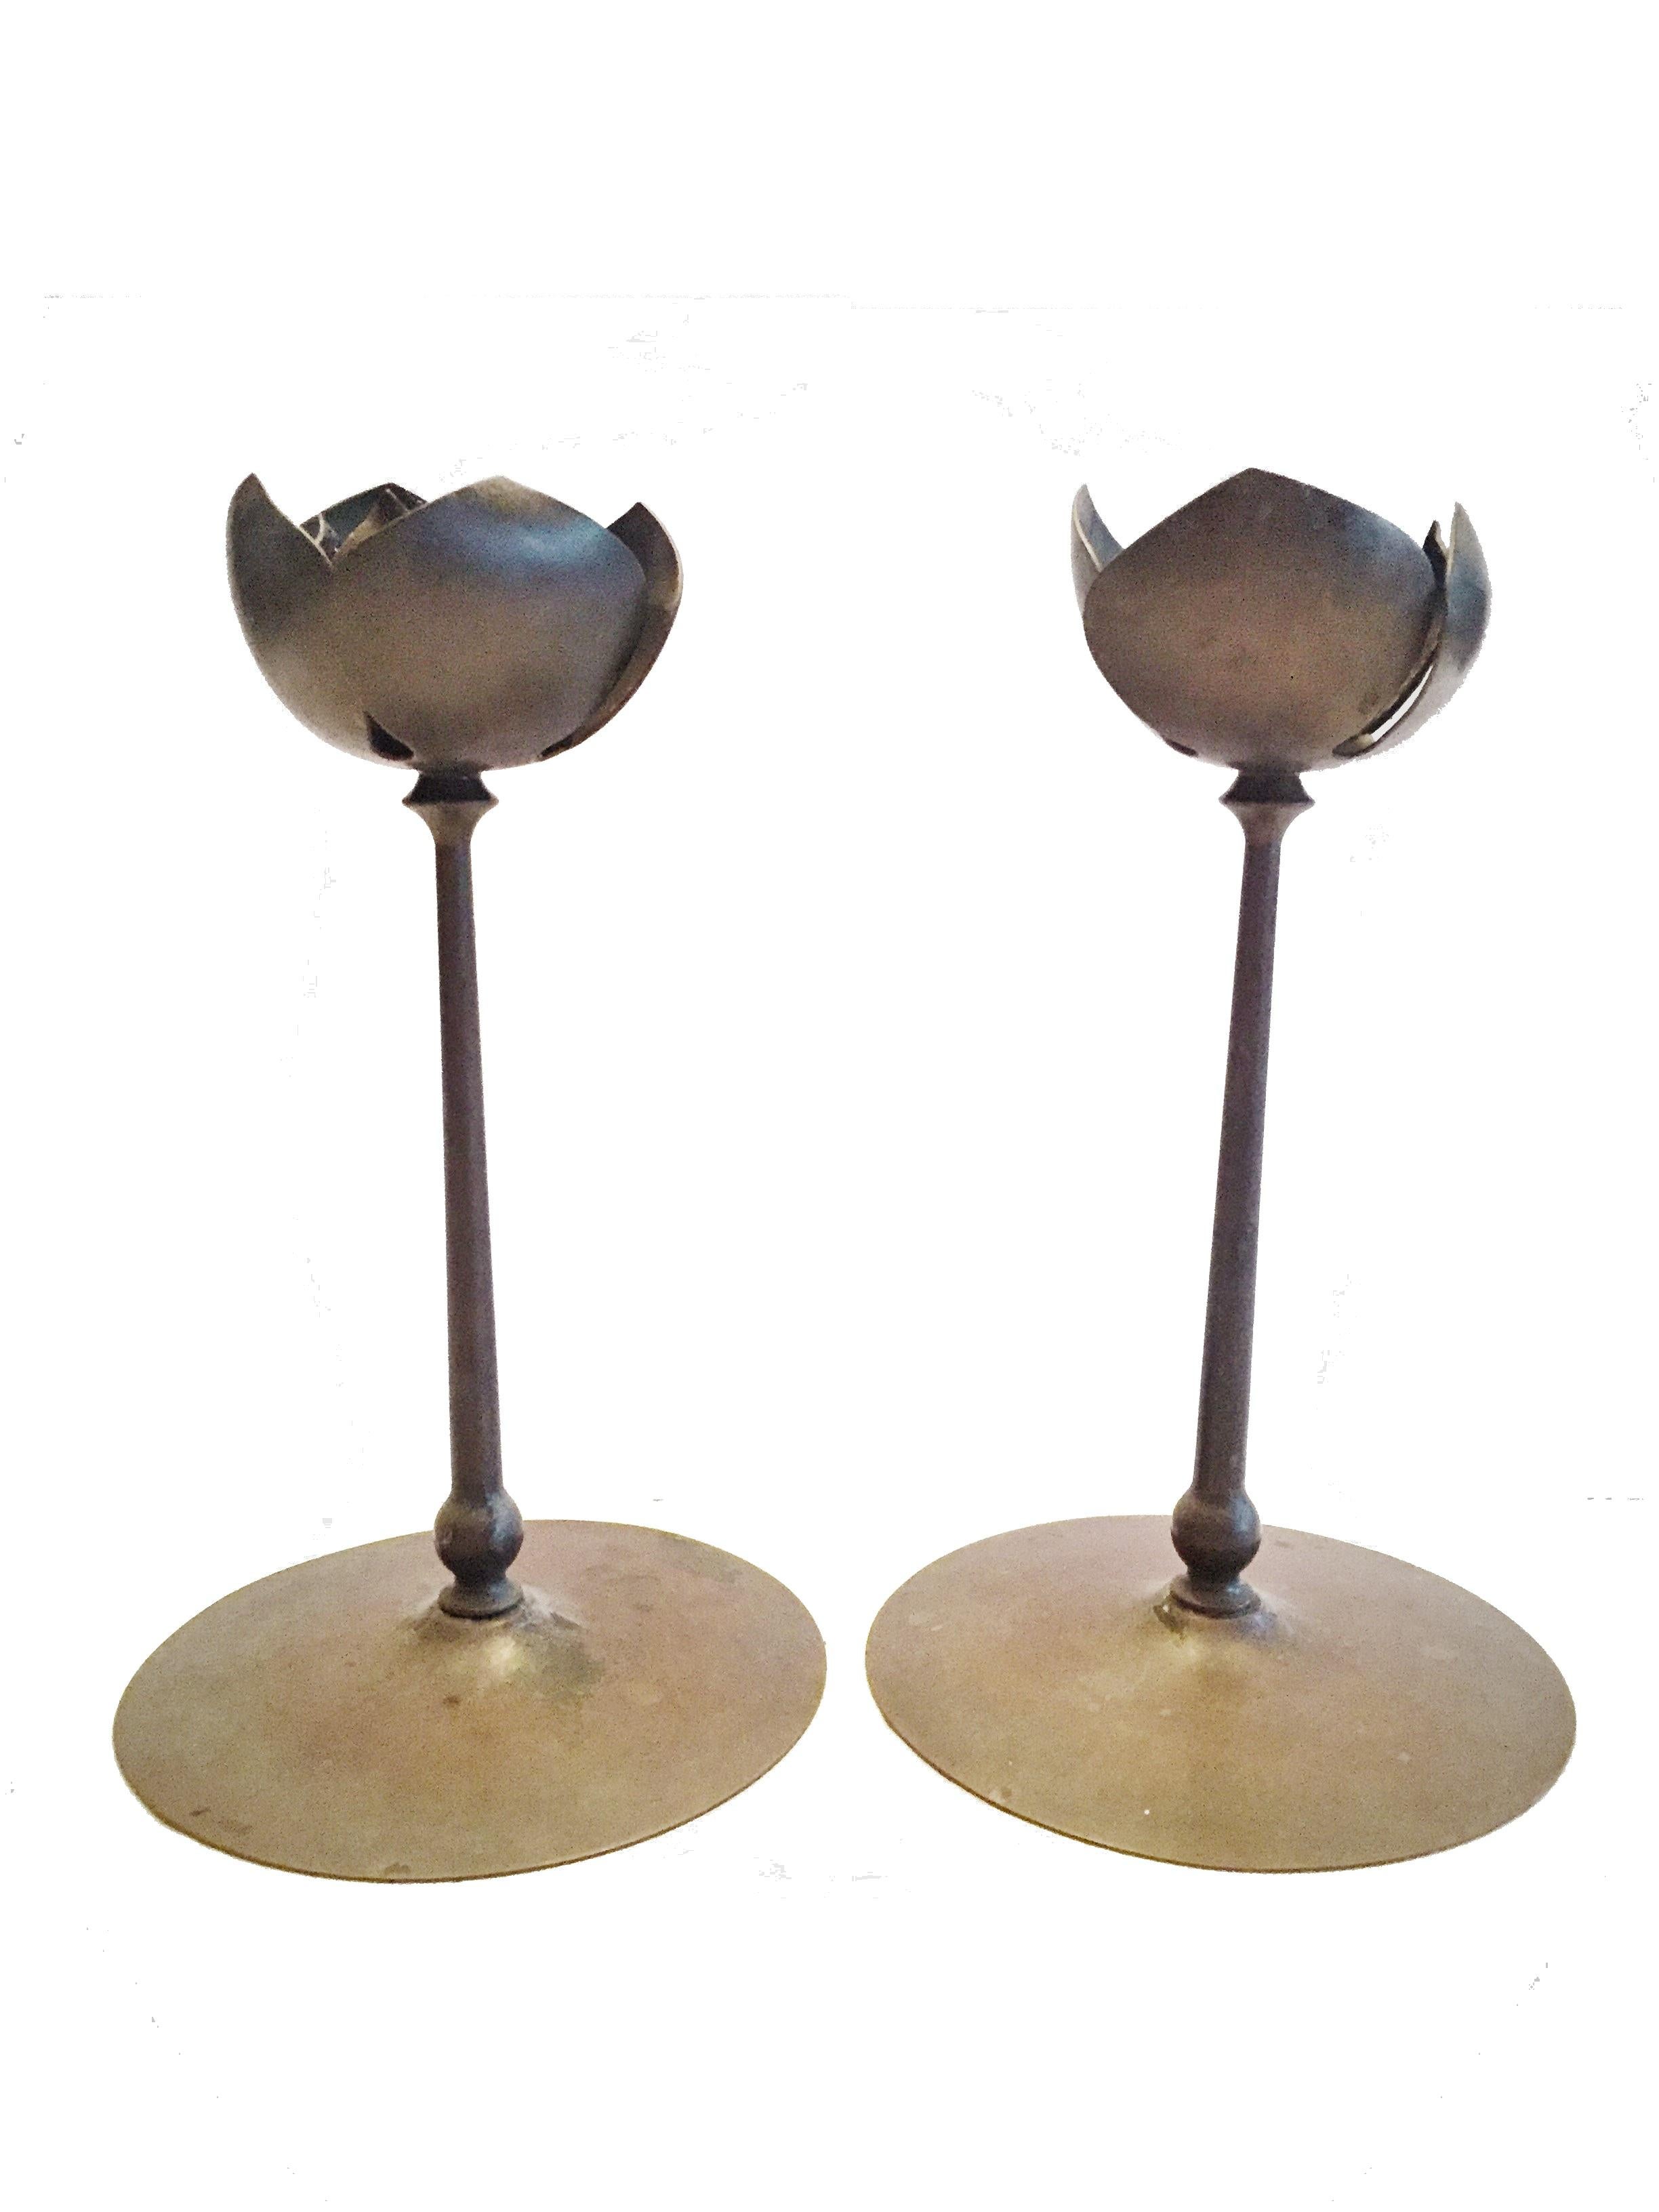 Pair of Mid-Century Modernist Anodized Brass Lotus Candlesticks, USA, 1950s For Sale 2